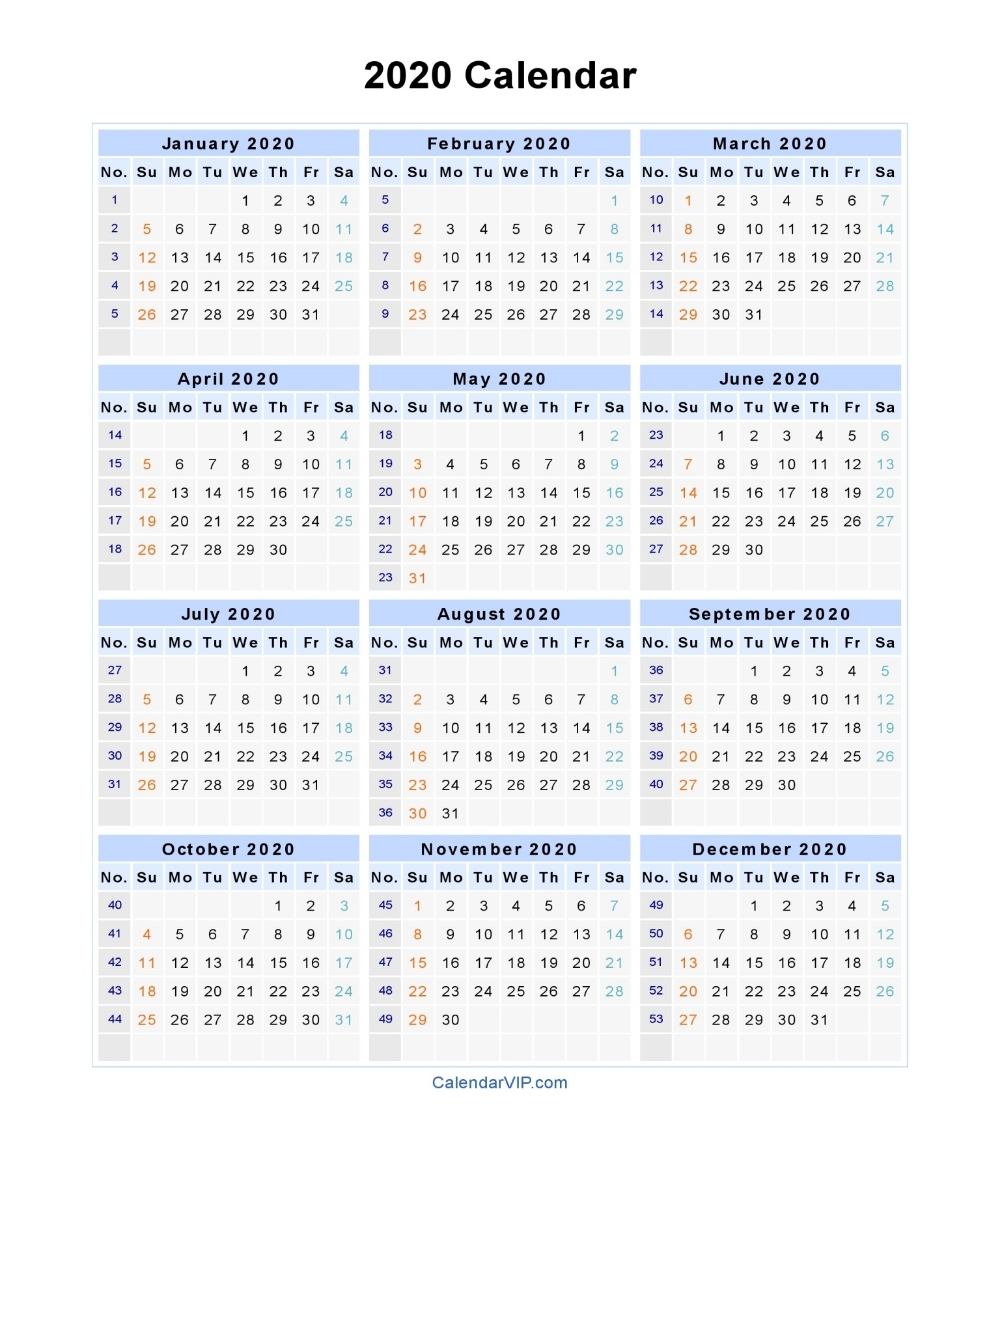 2020 Calendar - Blank Printable Calendar Template In Pdf in 2020 Free Year Printable Calendars Without Downloading